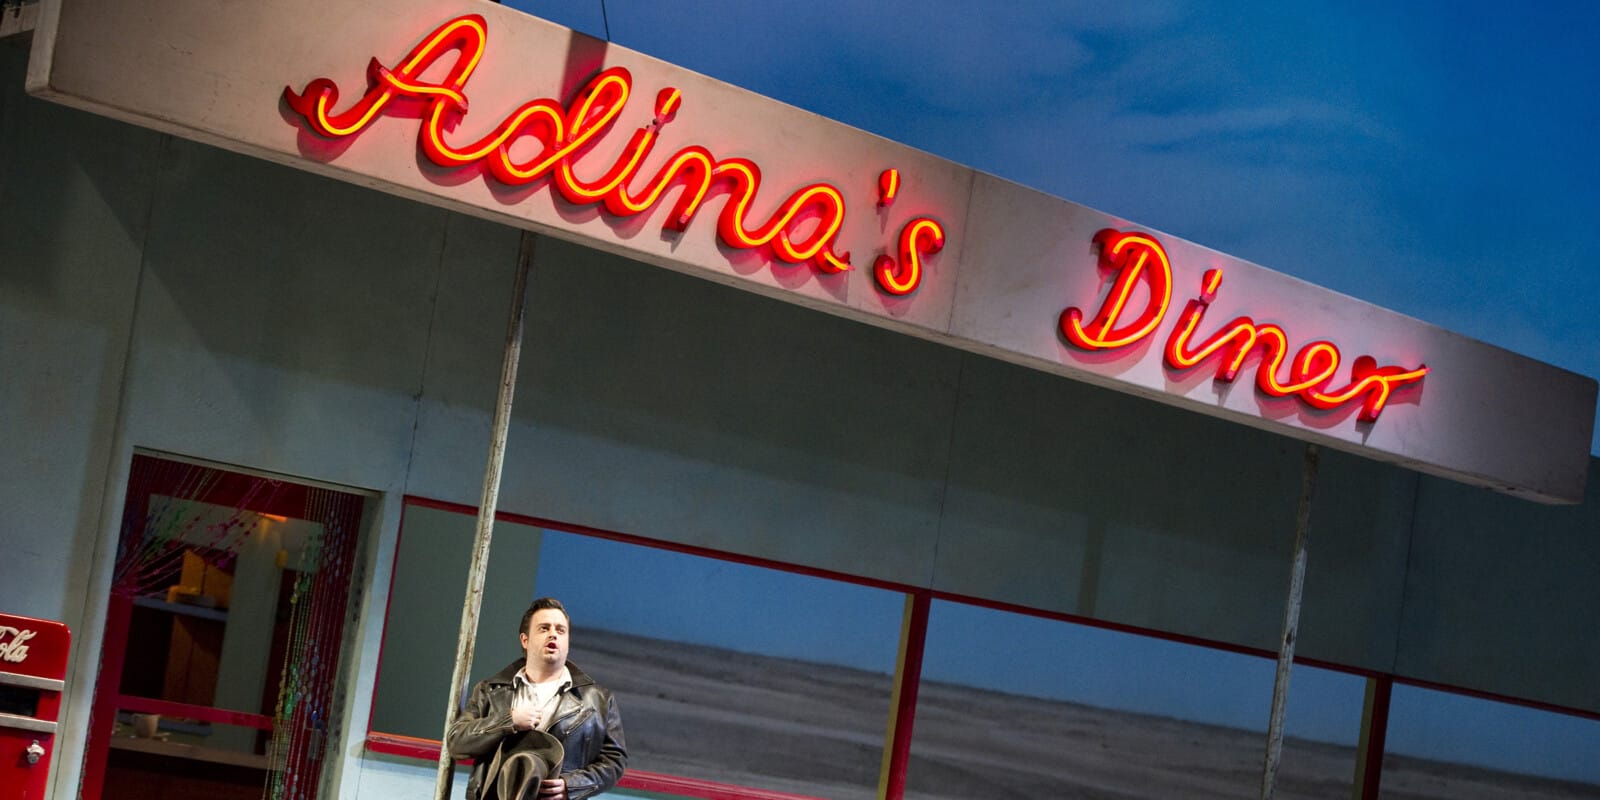 Adina's Diner with man standing under sign